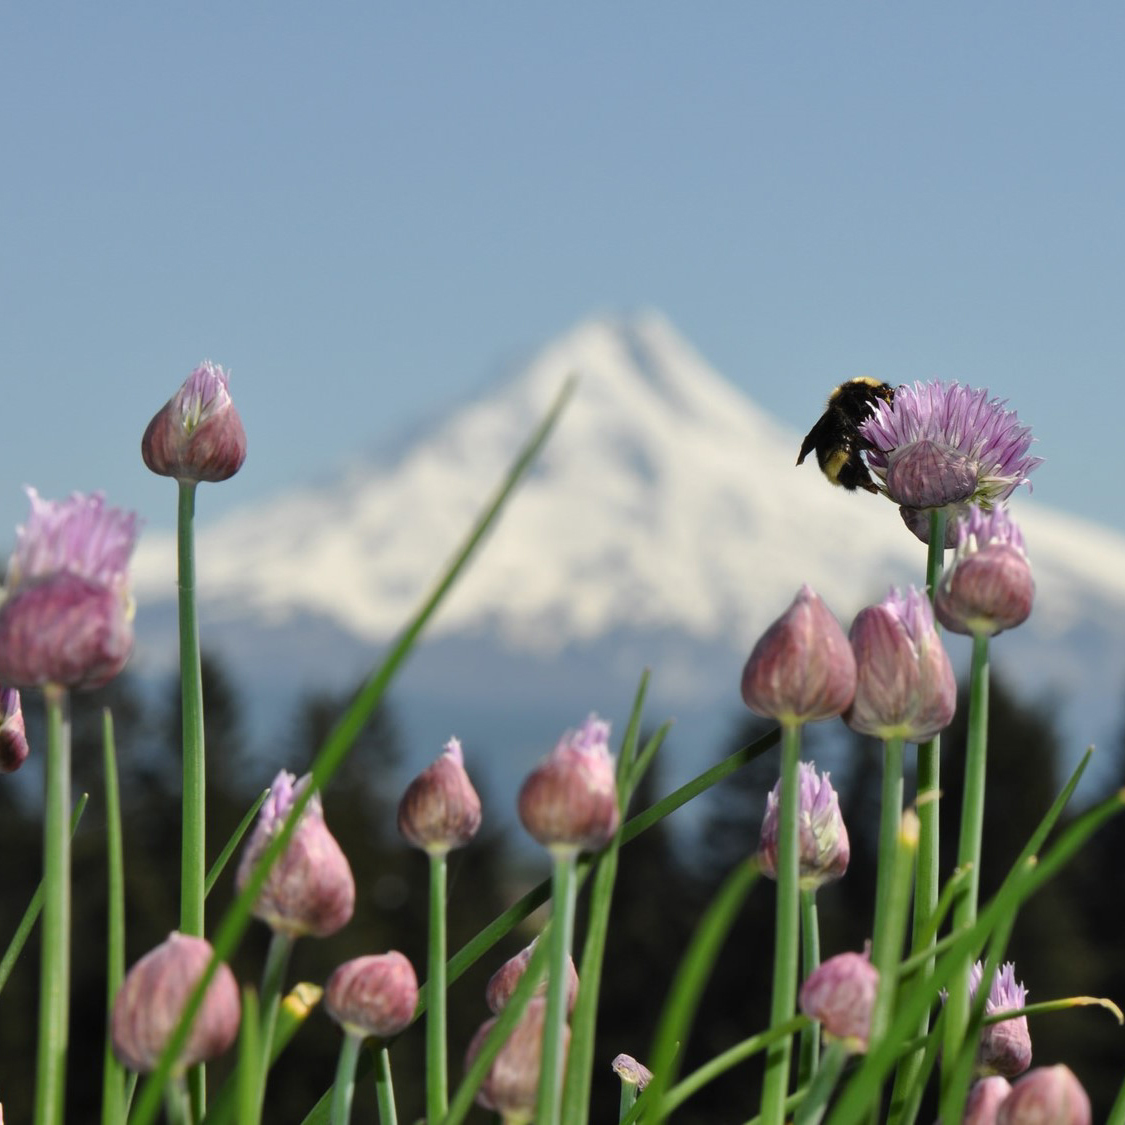 A bumble bee collects pollen from a pink, round bloom in the foreground; the snow-covered peak of Oregon's Mt. Hood looms in the background.